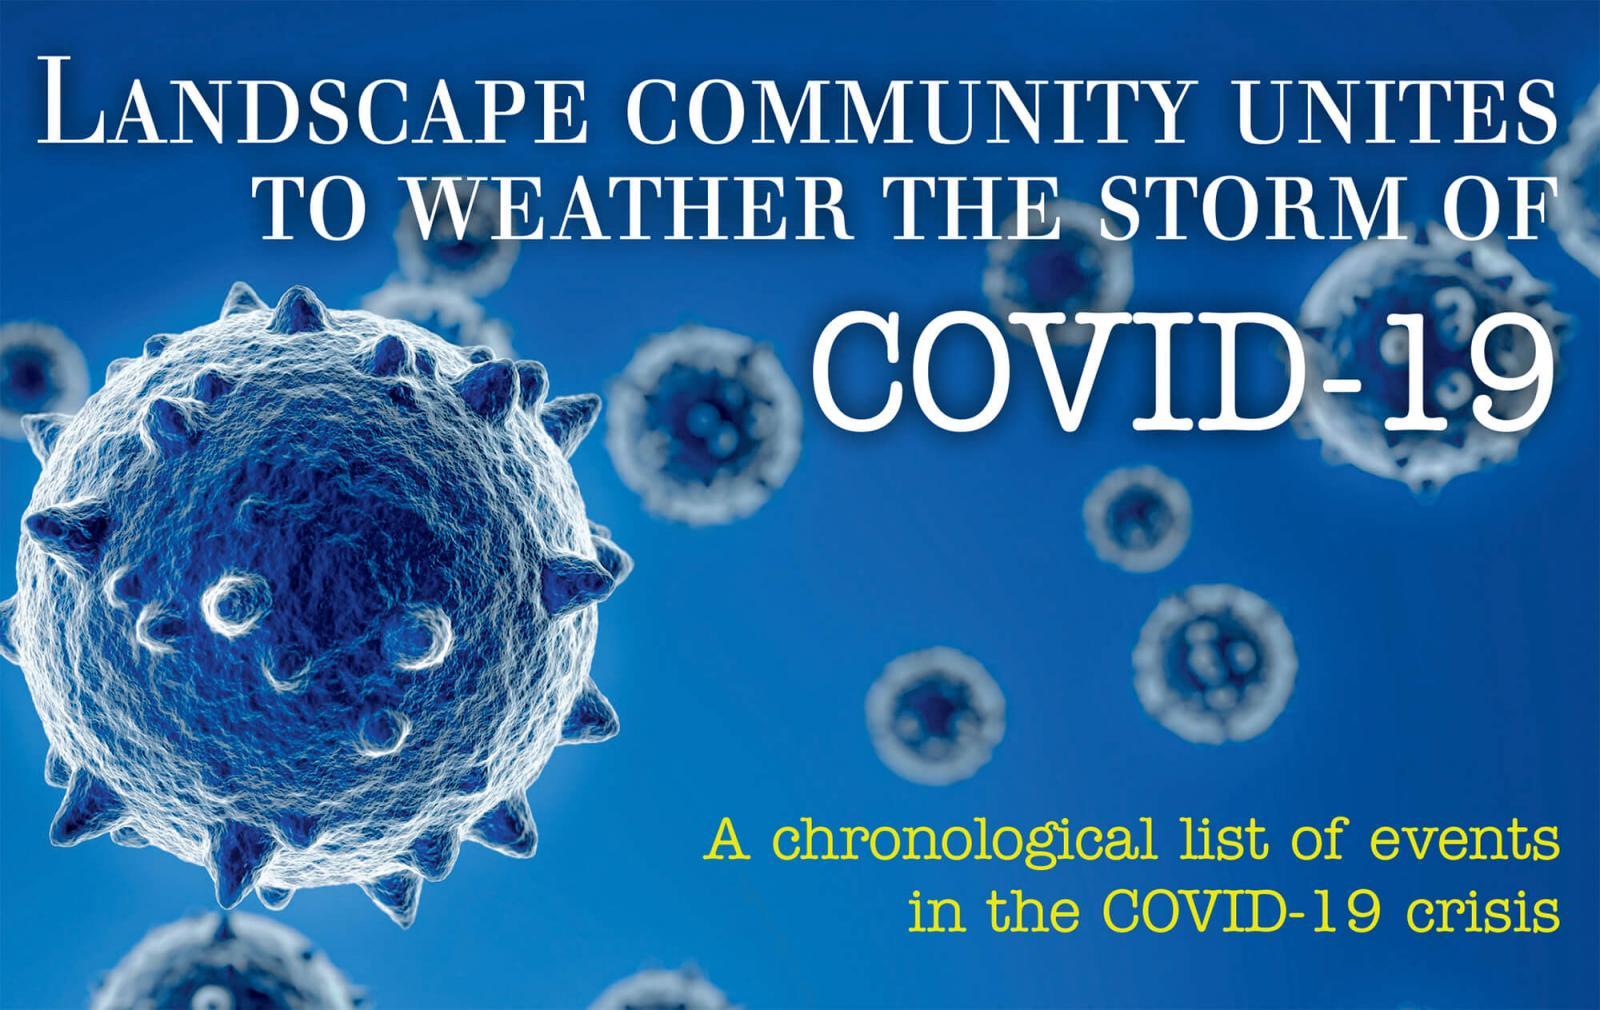 Landscape community unites to weather the storm of COVID-19